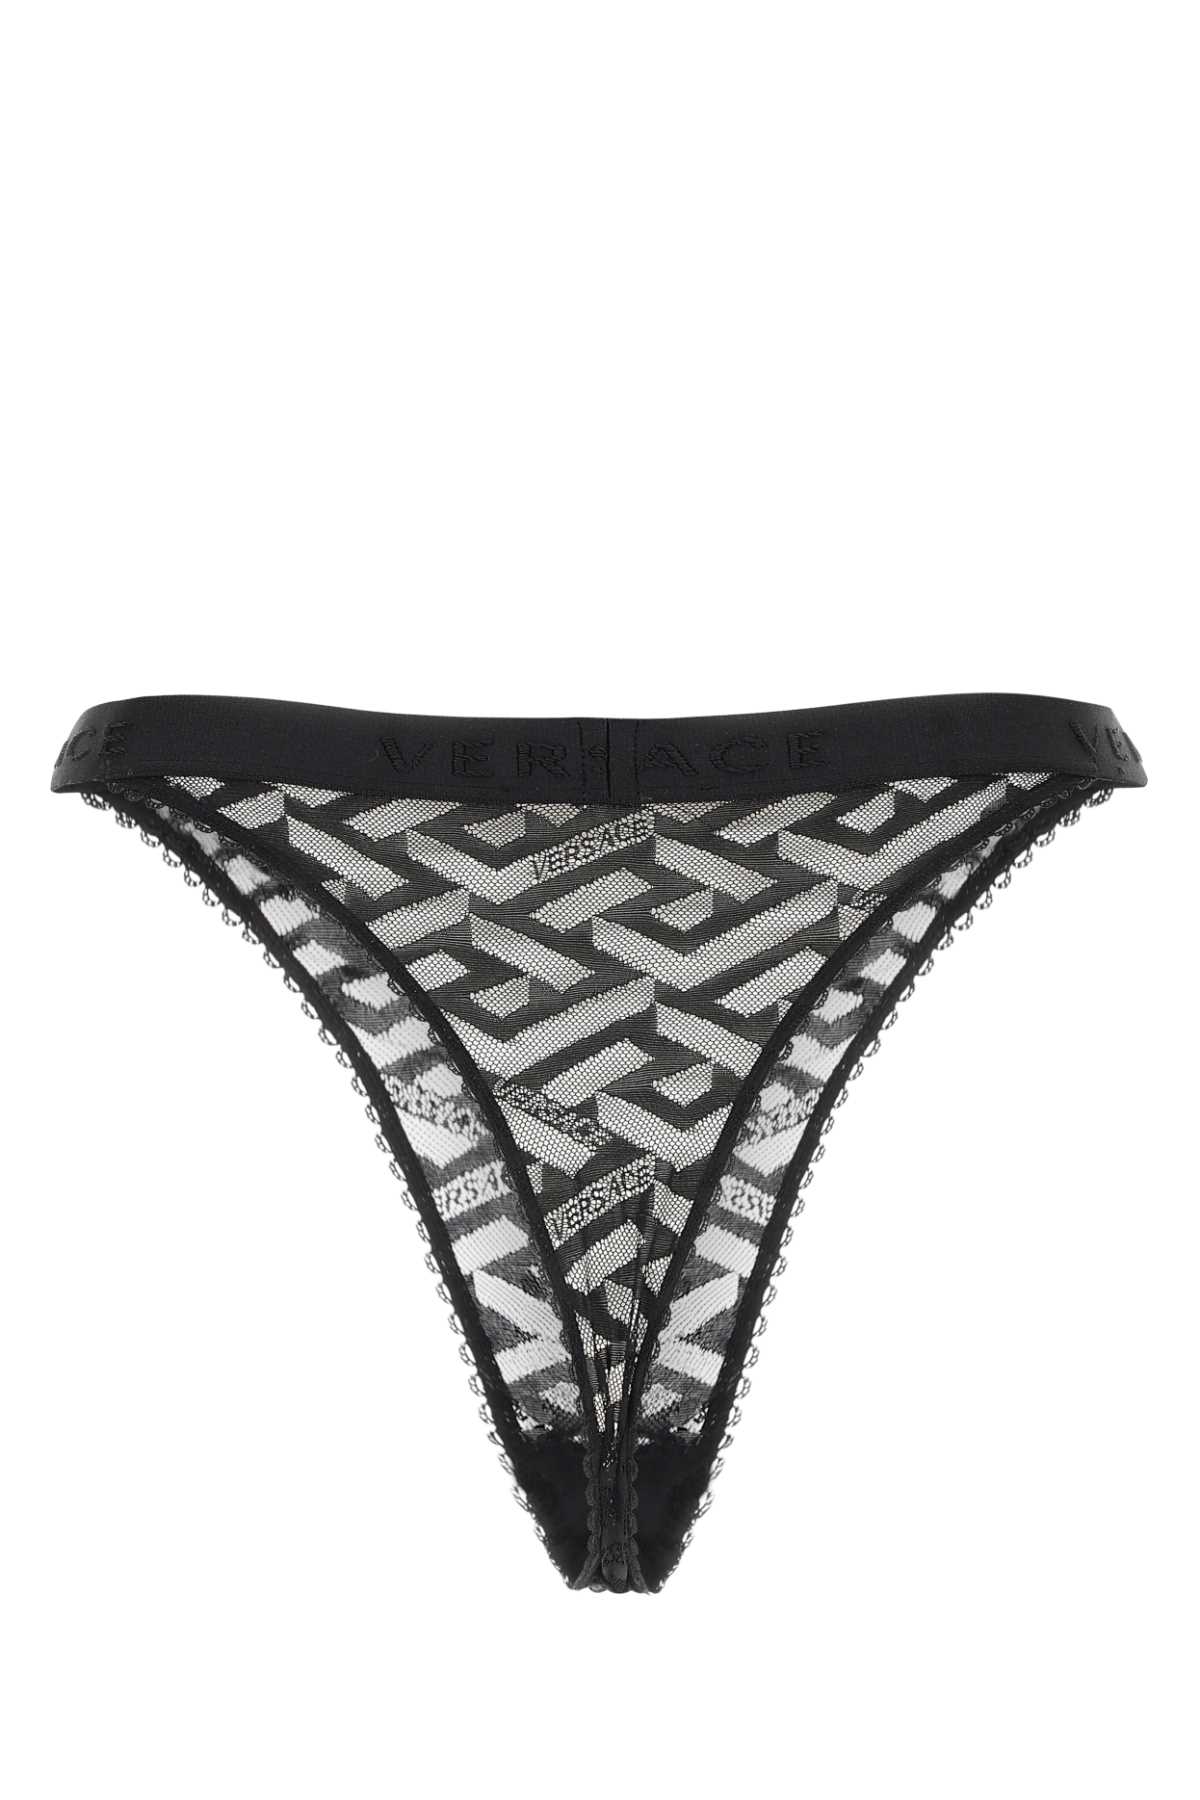 Versace Black Stretch Lace Thong In Nero